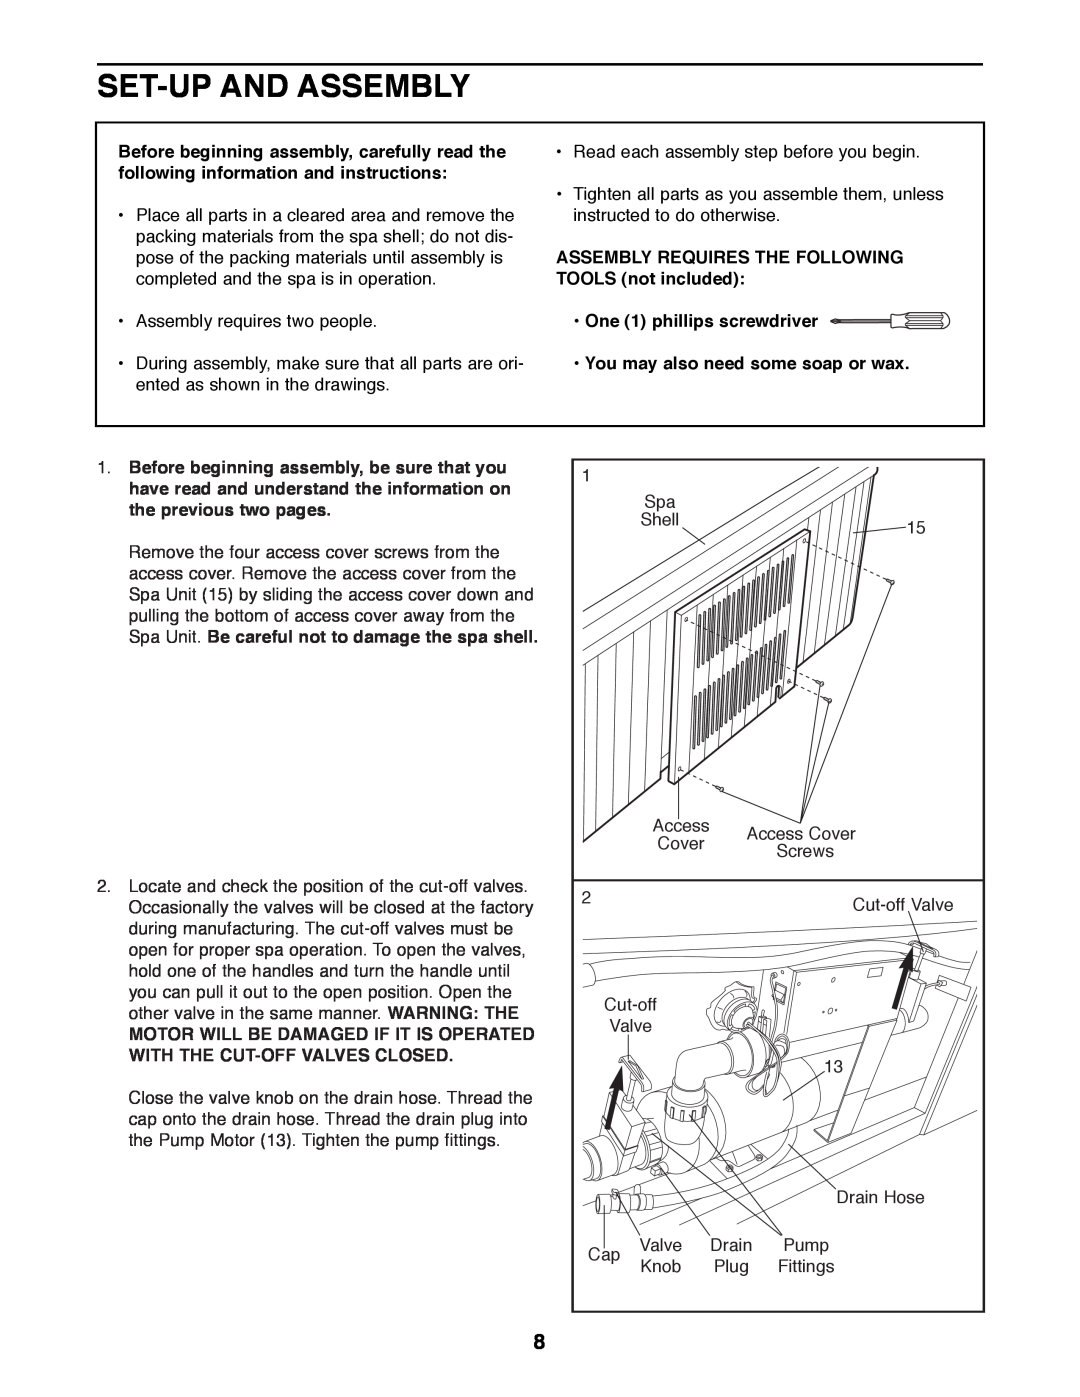 ProForm 831.210051 manual Set-Up And Assembly, ASSEMBLY REQUIRES THE FOLLOWING TOOLS not included 